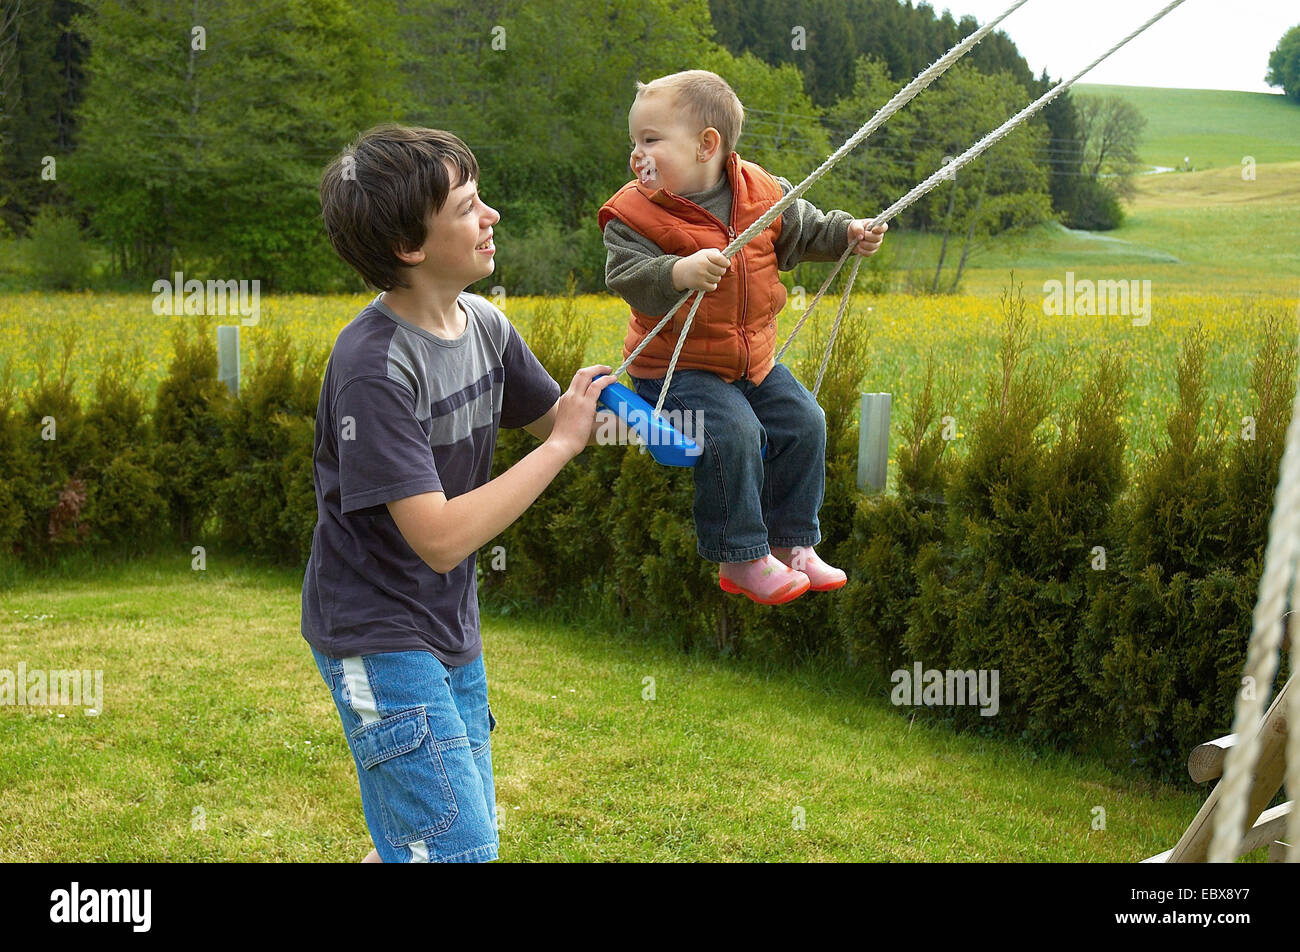 Brothers are swinging together in a garden Stock Photo